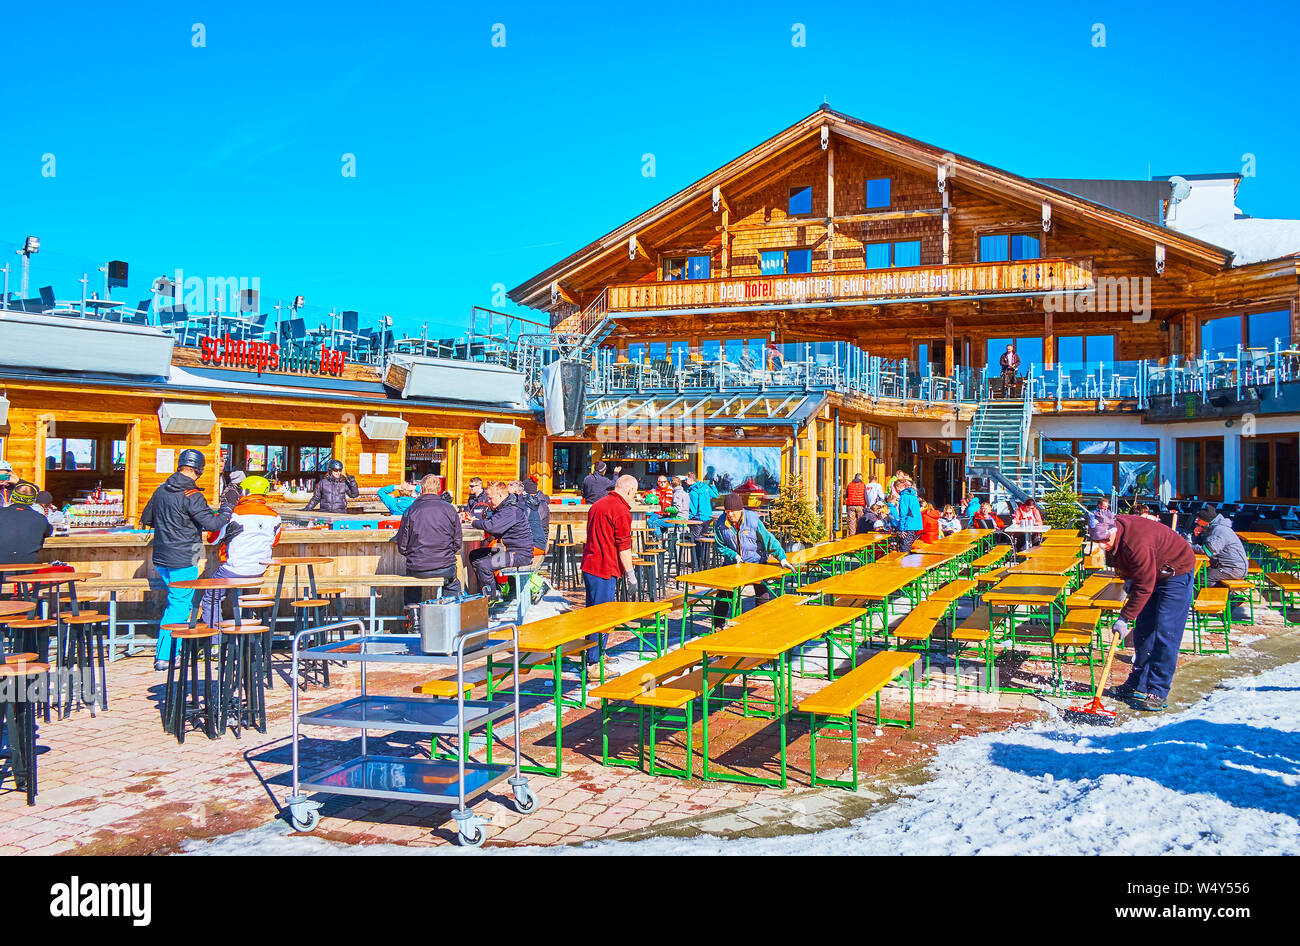 ZELL AM SEE, AUSTRIA - FEBRUARY 28, 2019: The sportsmen and tourists in open air bar-restaurant, located on top of Schmitten mountain, on February 28 Stock Photo